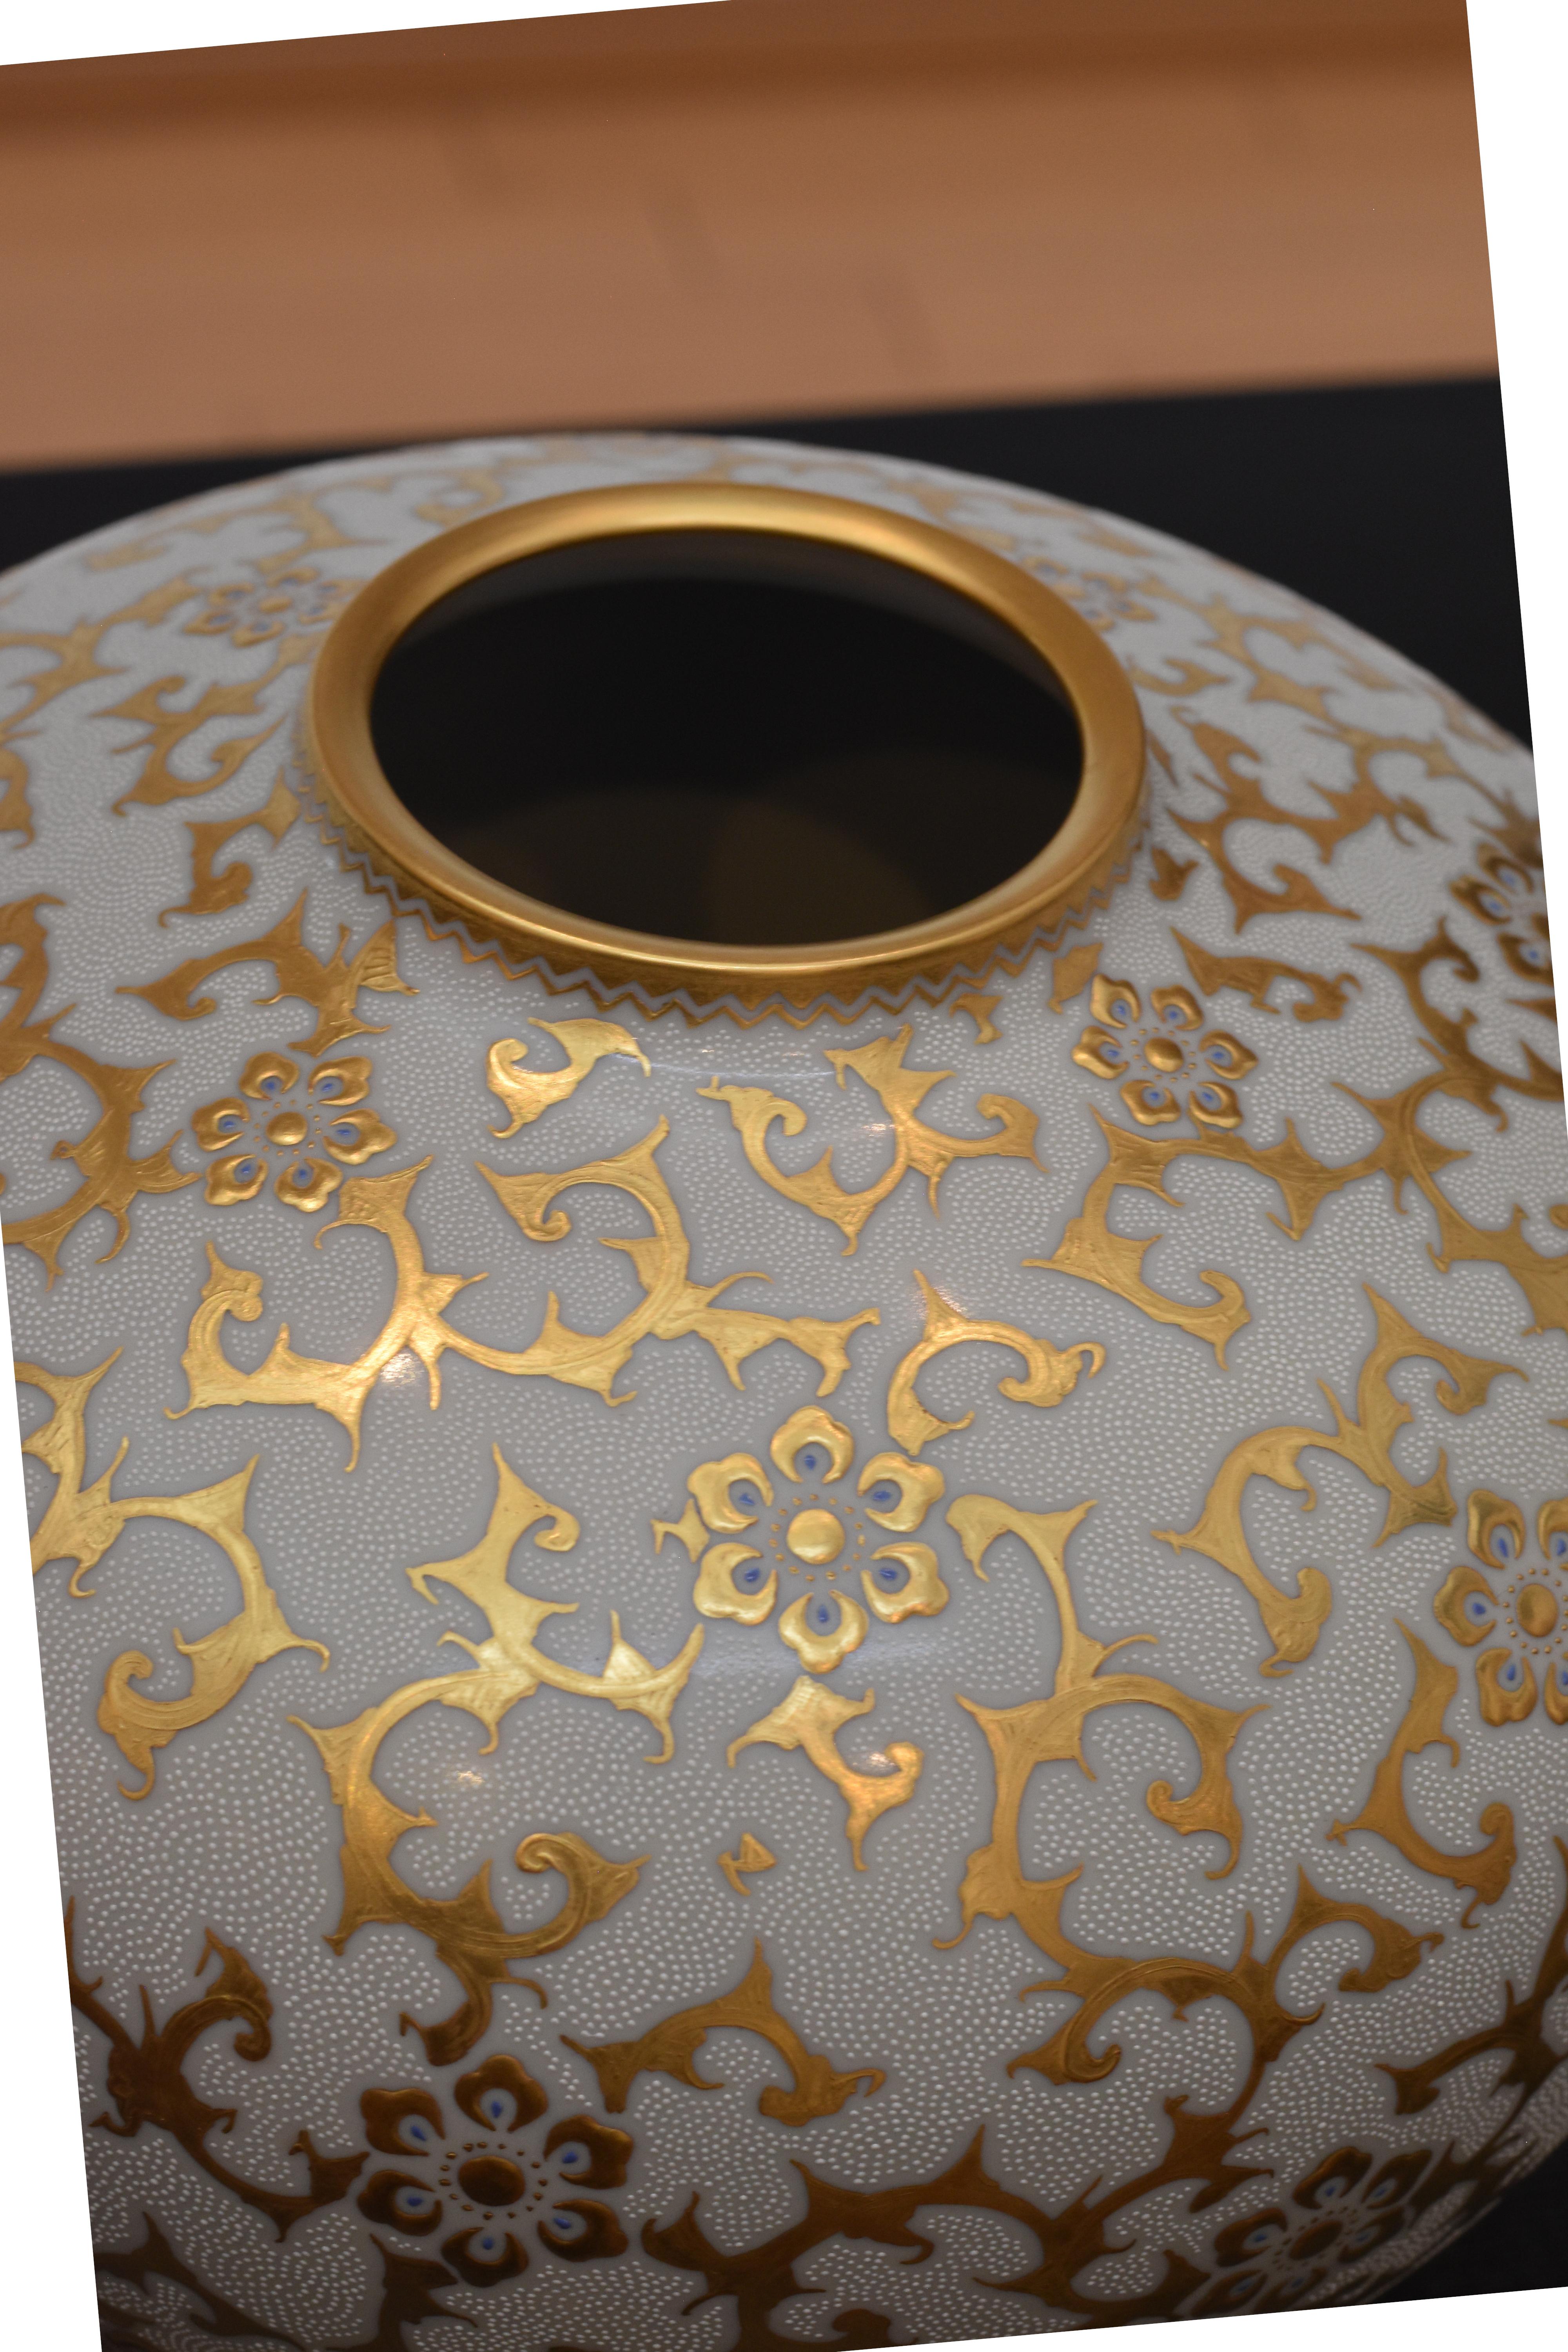 Contemporary Japanese White Pure Gold Porcelain Vase by Master Artist, 2 In New Condition For Sale In Takarazuka, JP